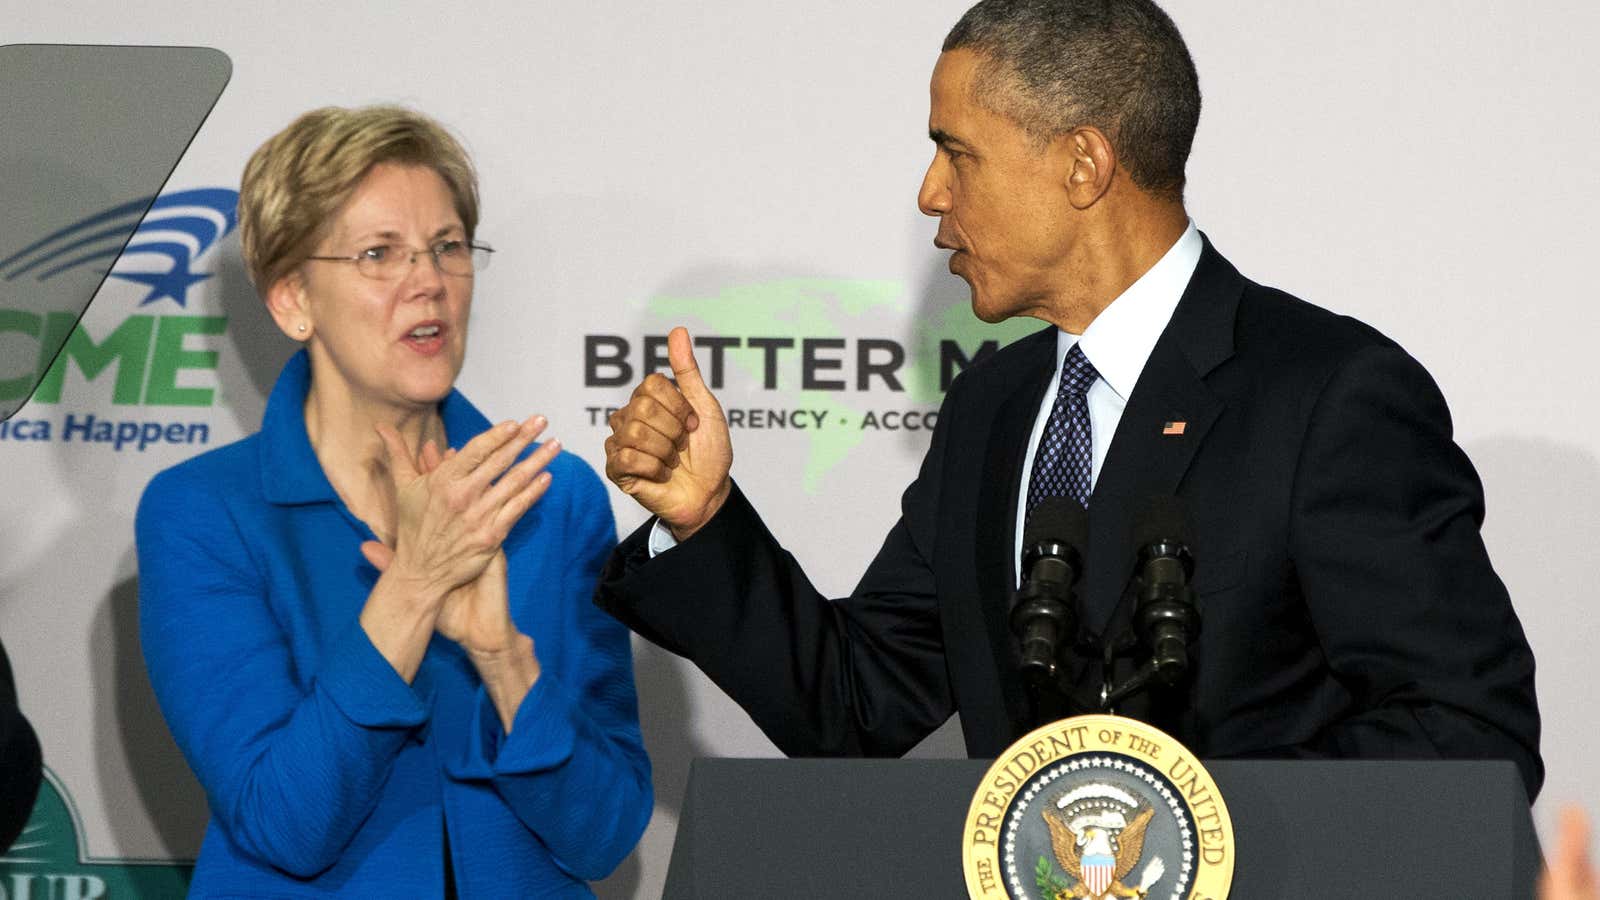 If Americans saved more for retirement, these two wouldn’t be arguing so much about TPP.